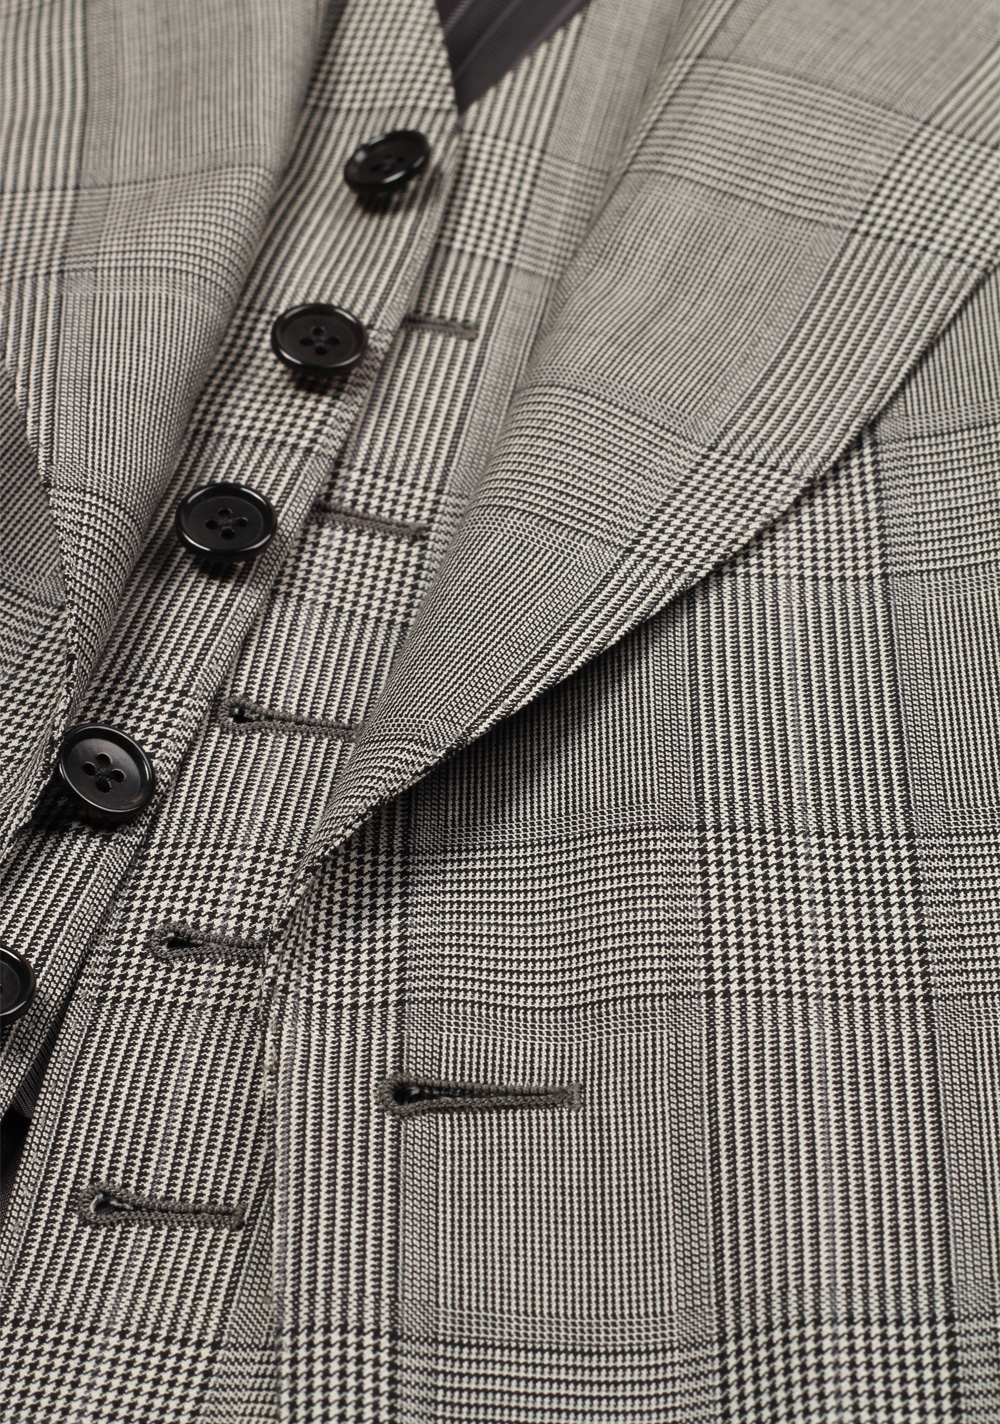 TOM FORD Shelton Checked Gray 3 Piece Suit Size 48 / 38R U.S. | Costume ...